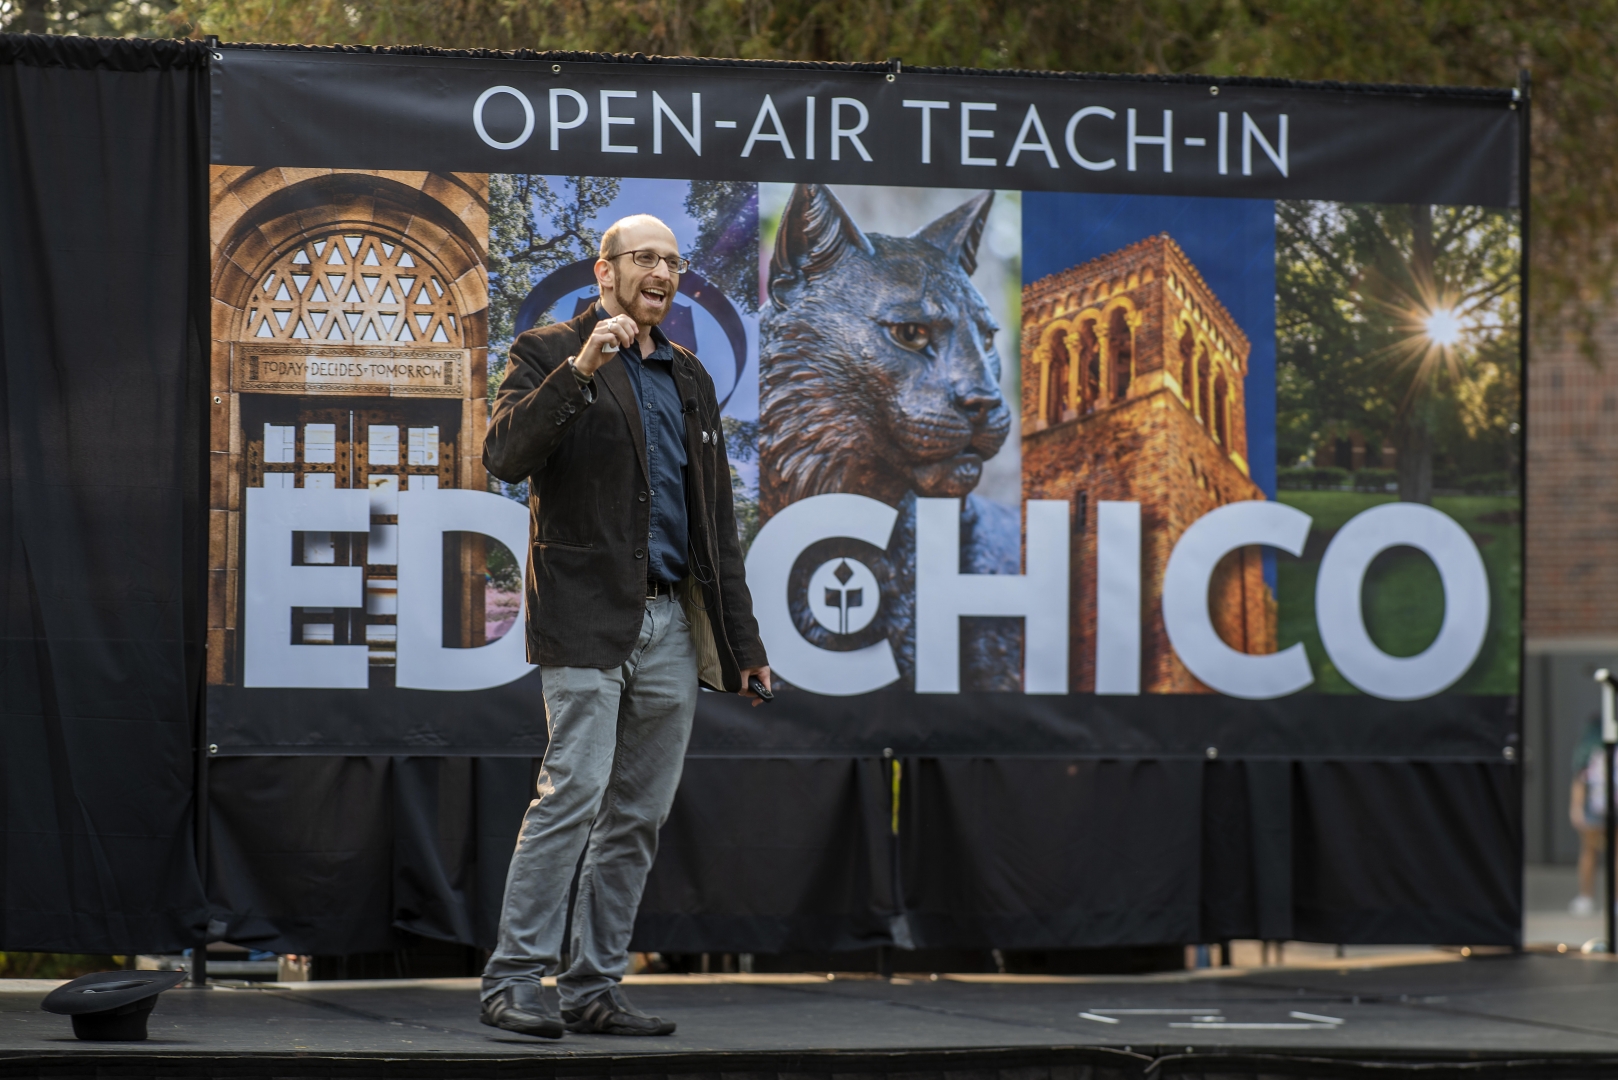 Asa Mittman stands on stage in front of an EDXCHICO poster, speaking to a crowd.